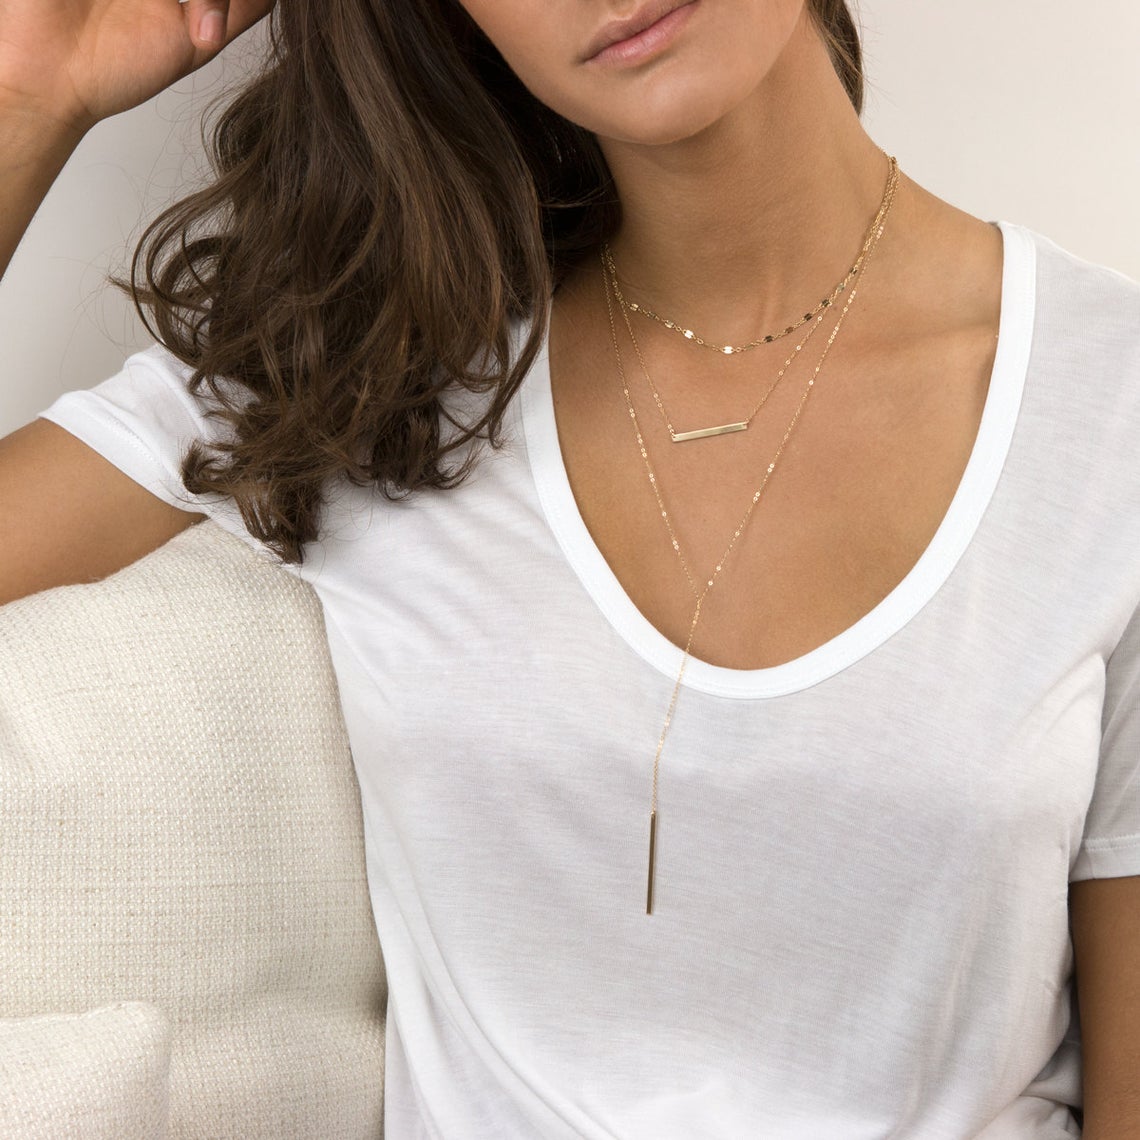 TASISO Gold Lace Chain Necklace Lip Chain Long Necklace